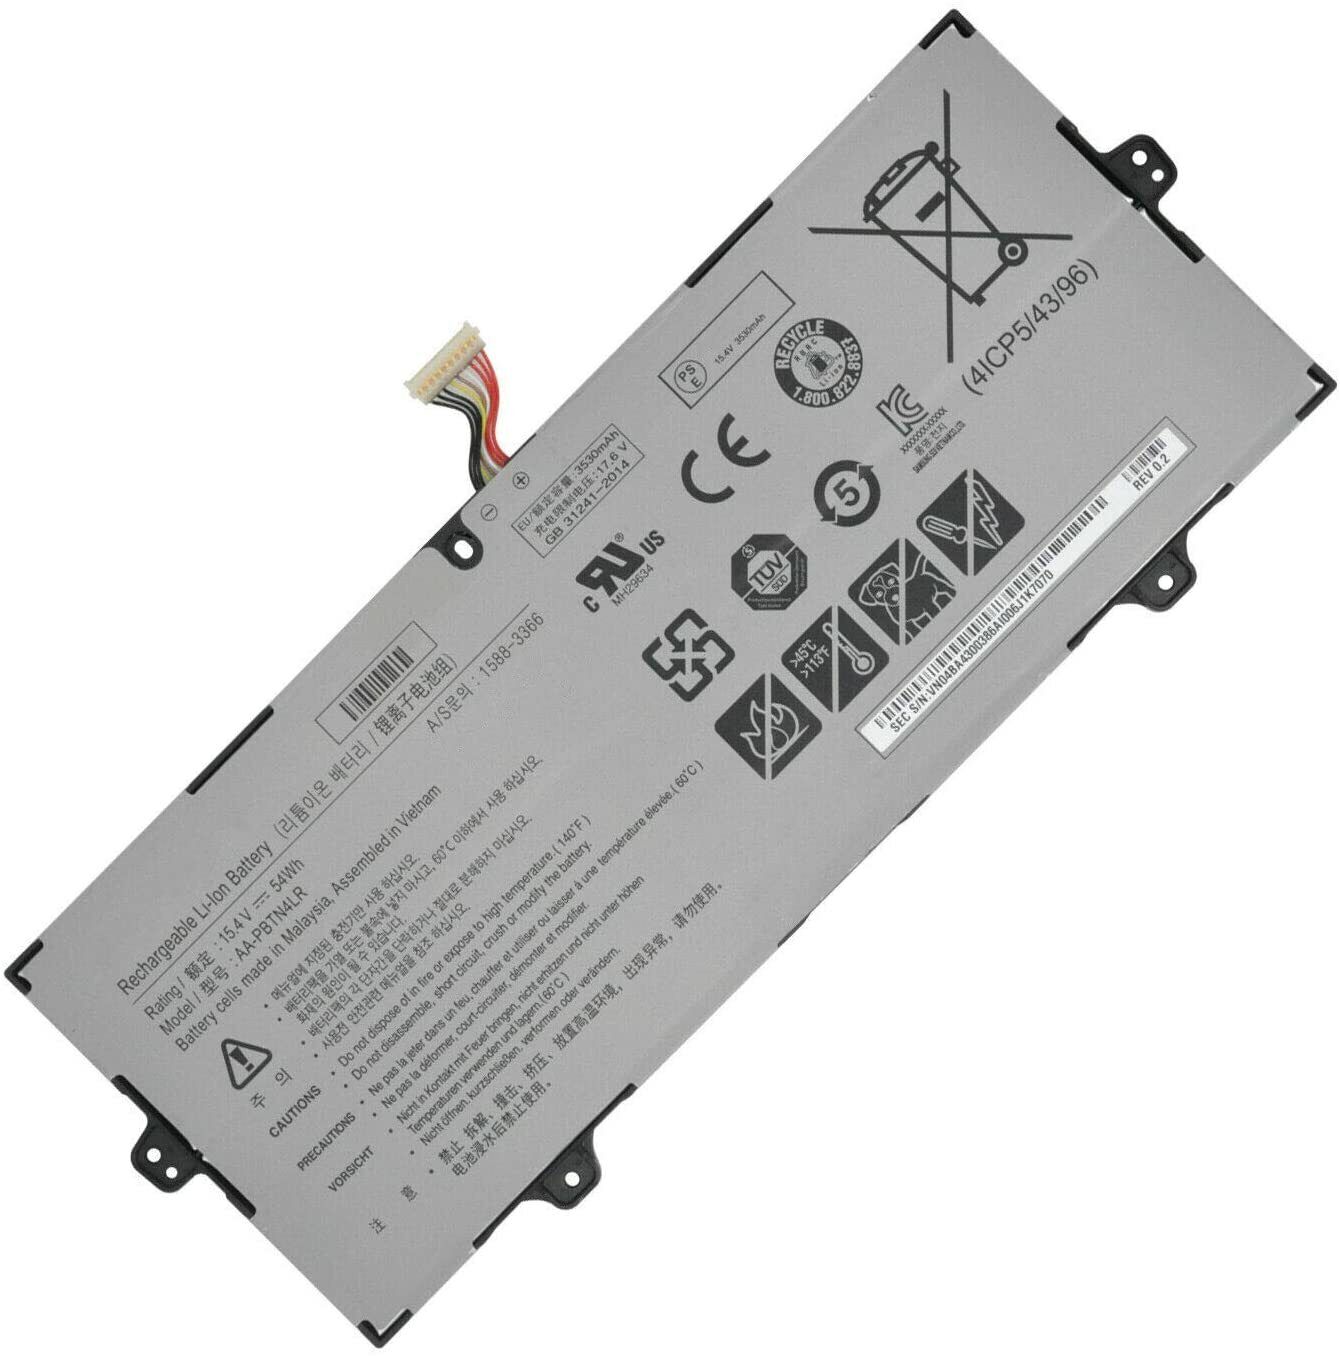 Genuine new AA-PBTN4LR battery for Samsung Notebook 9 NP940X5N NP940X3M NP940X3N